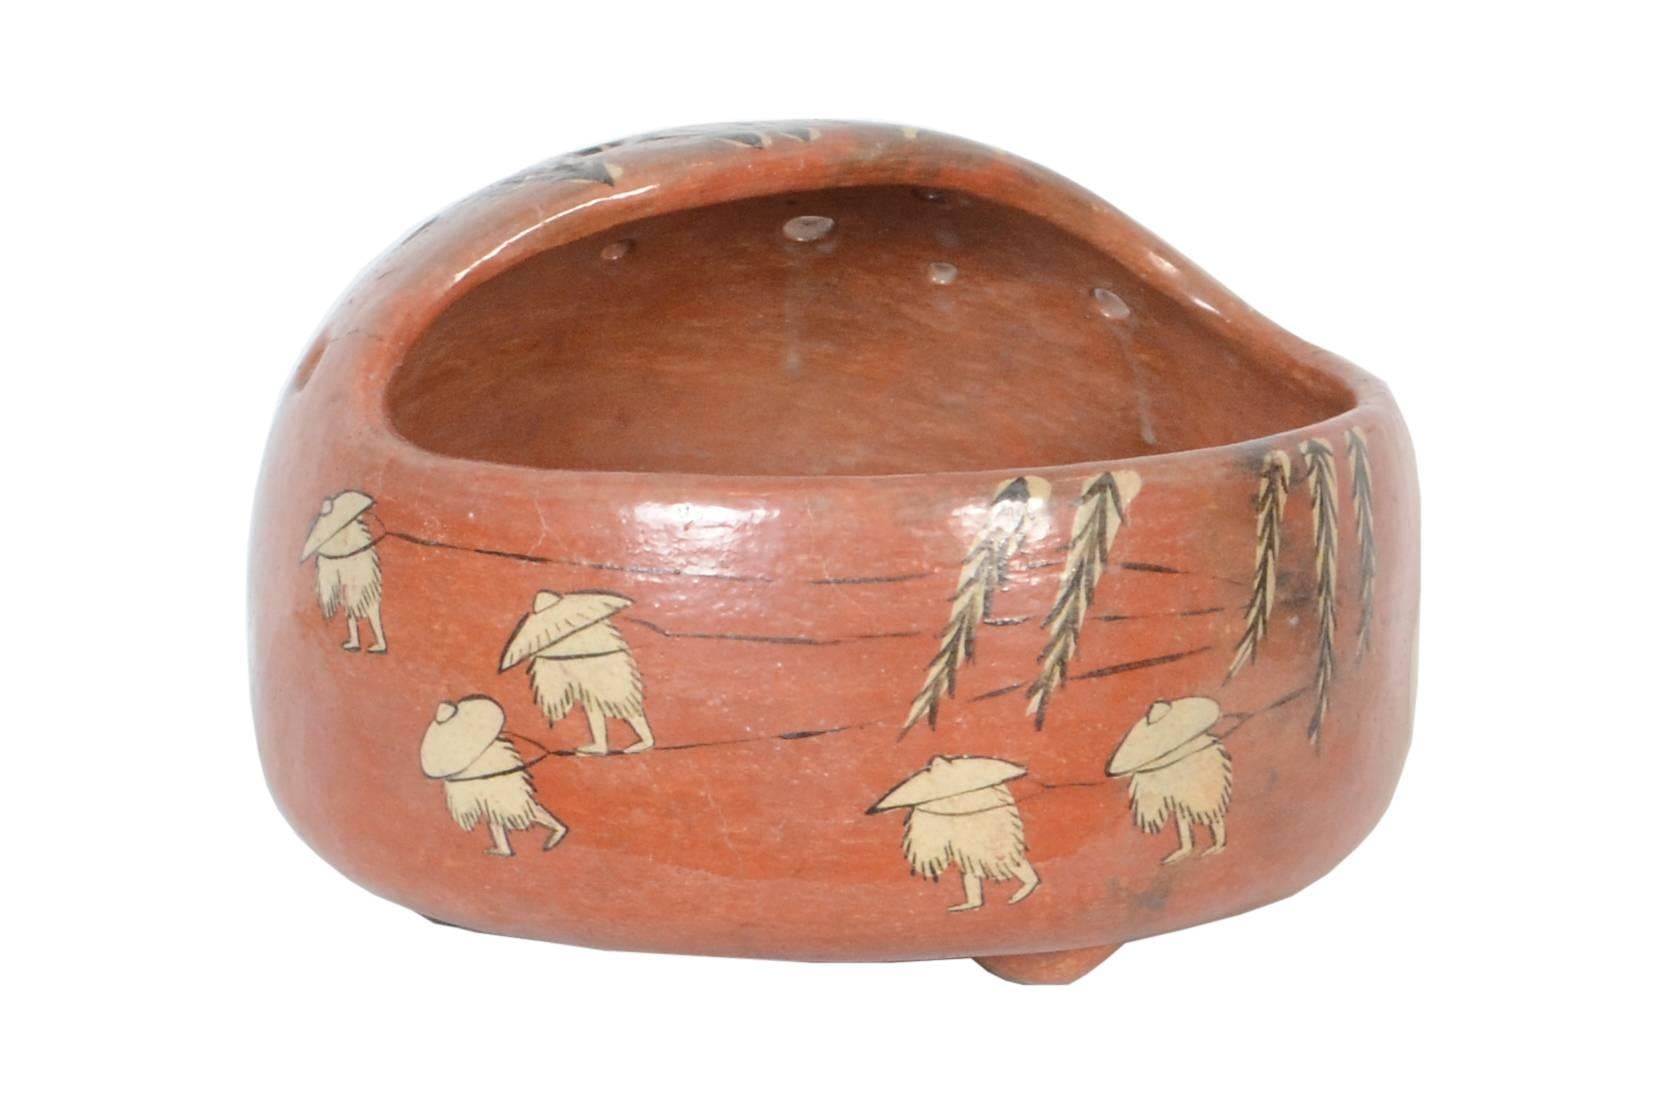 A furo tearoom brazier by Raku Kichizaemon XI Keinyu (1817-1902) decorated in bold style over a brick red glaze. The classical scene depicts men in ‘mino’ straw raincoats pulling a barge up river under the overhanging branches of an ancient willow